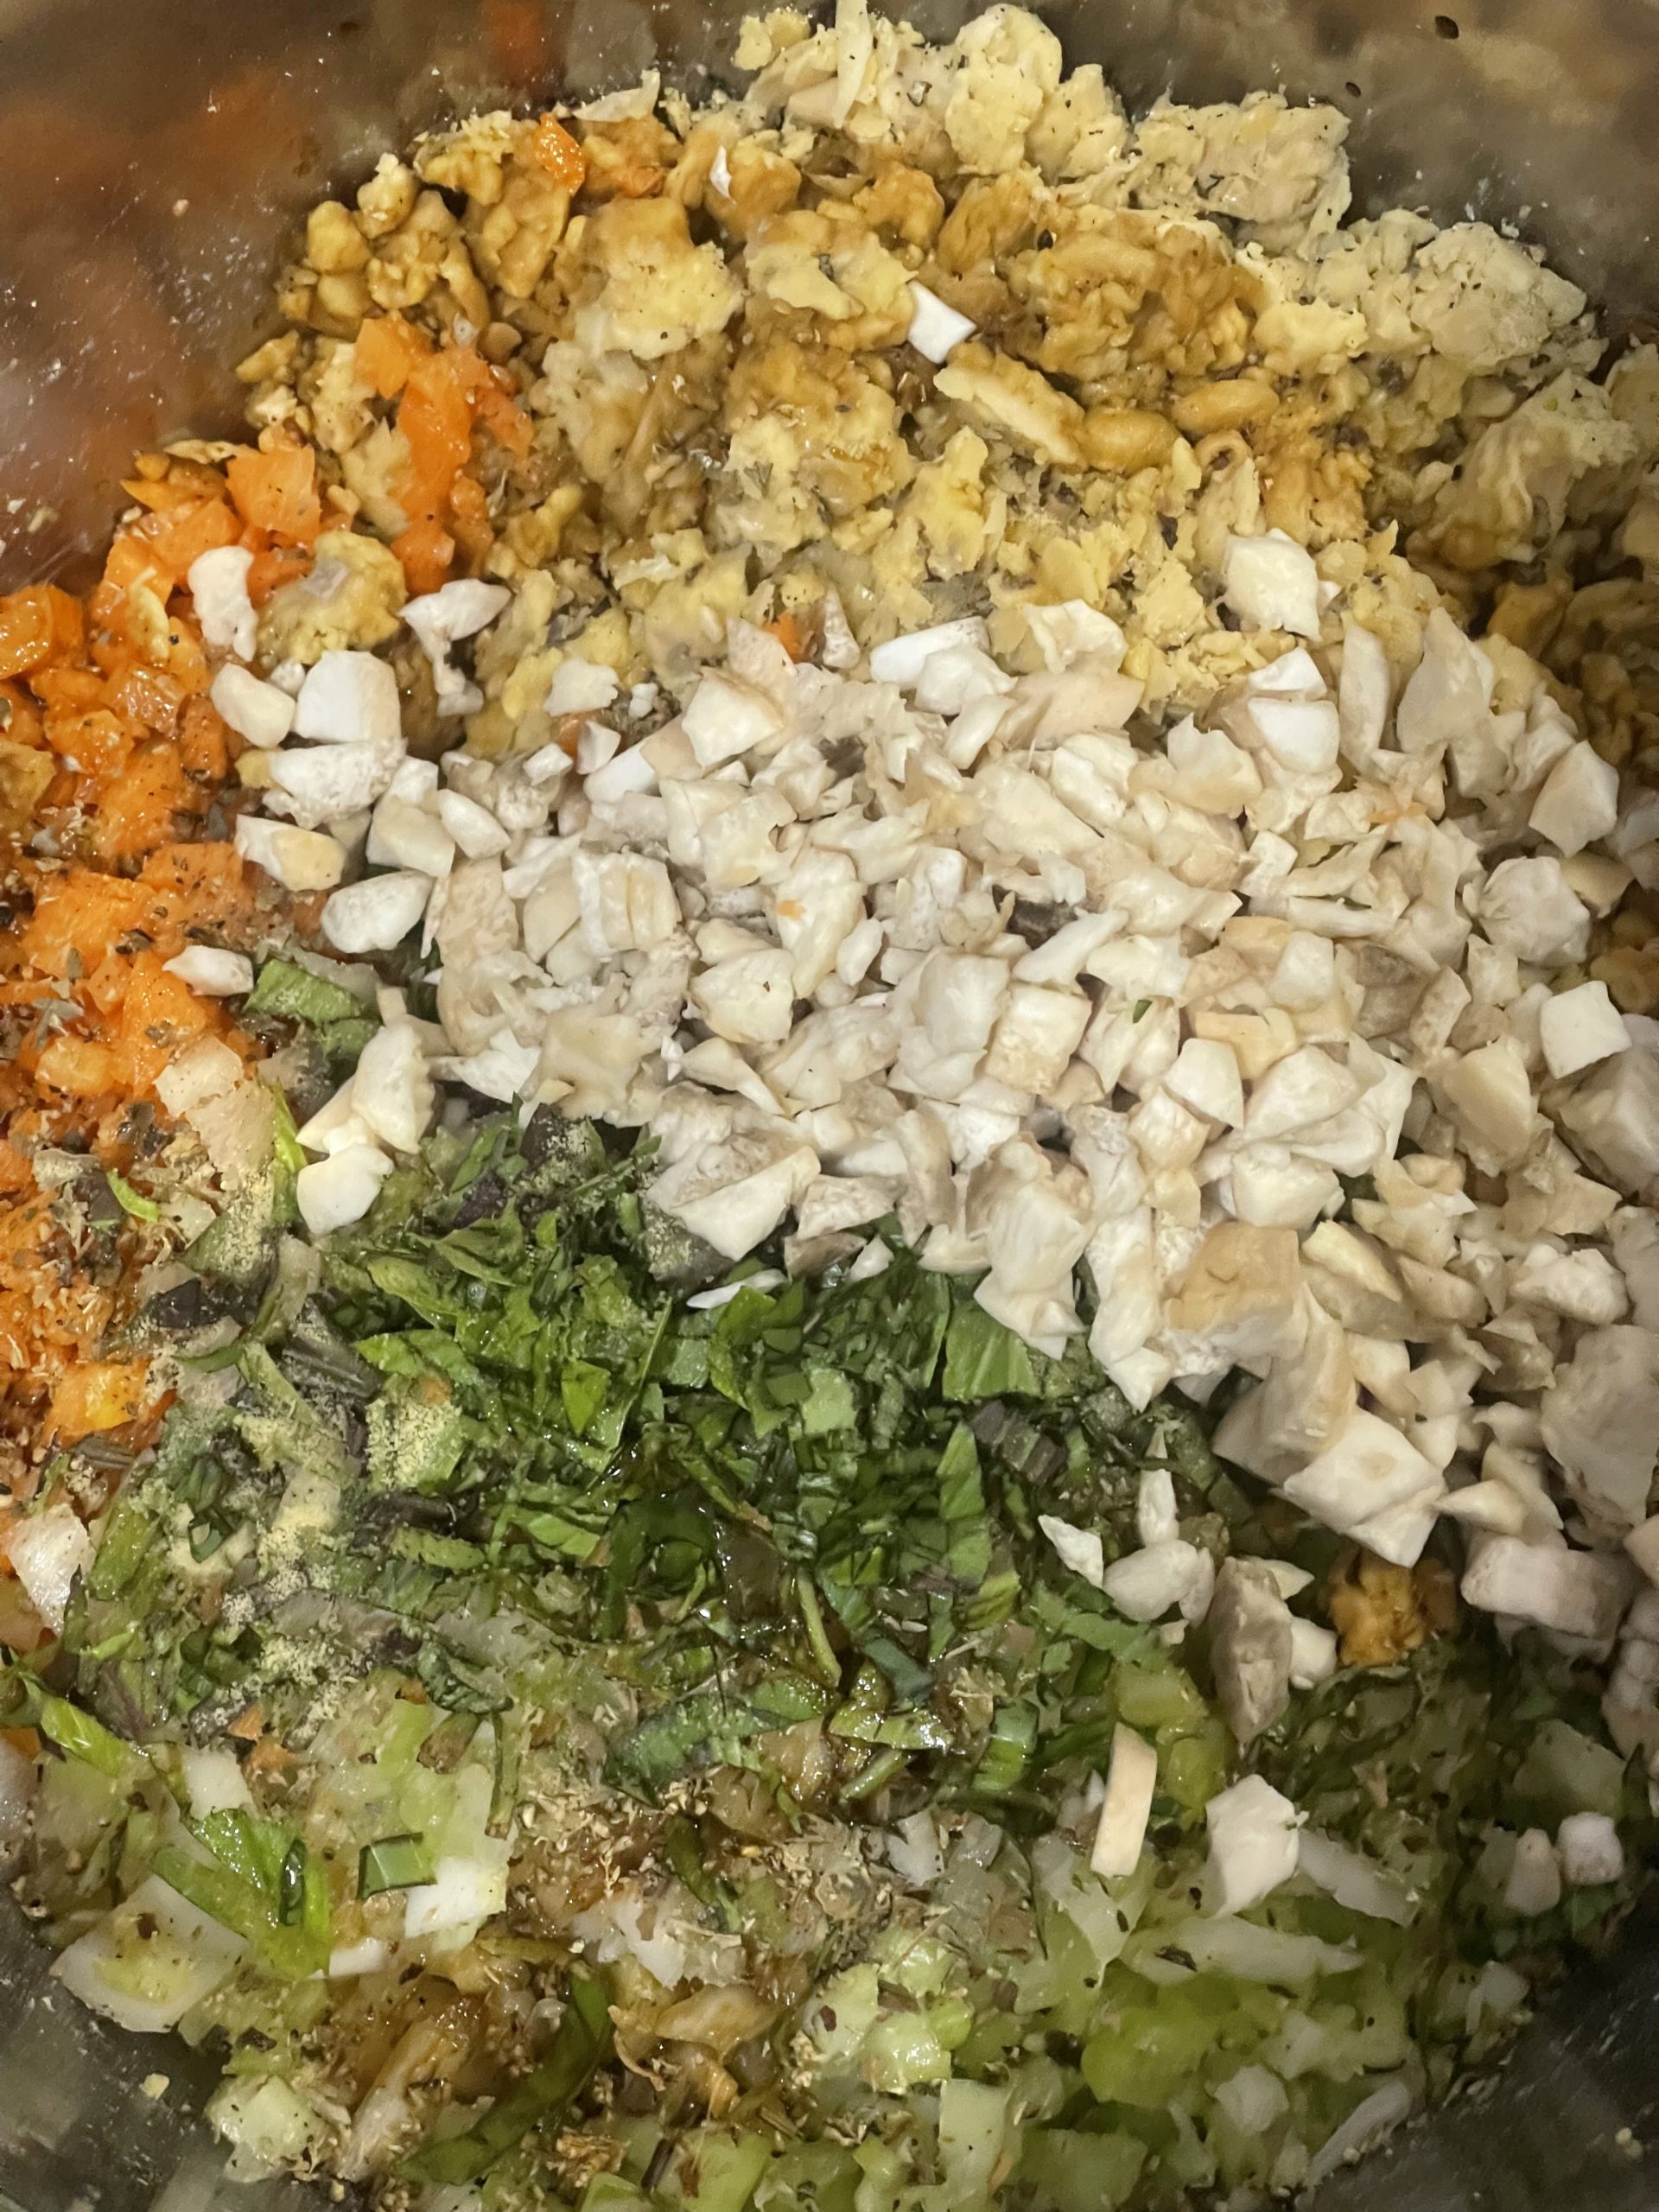 A mixture of diced vegetables in a bowl